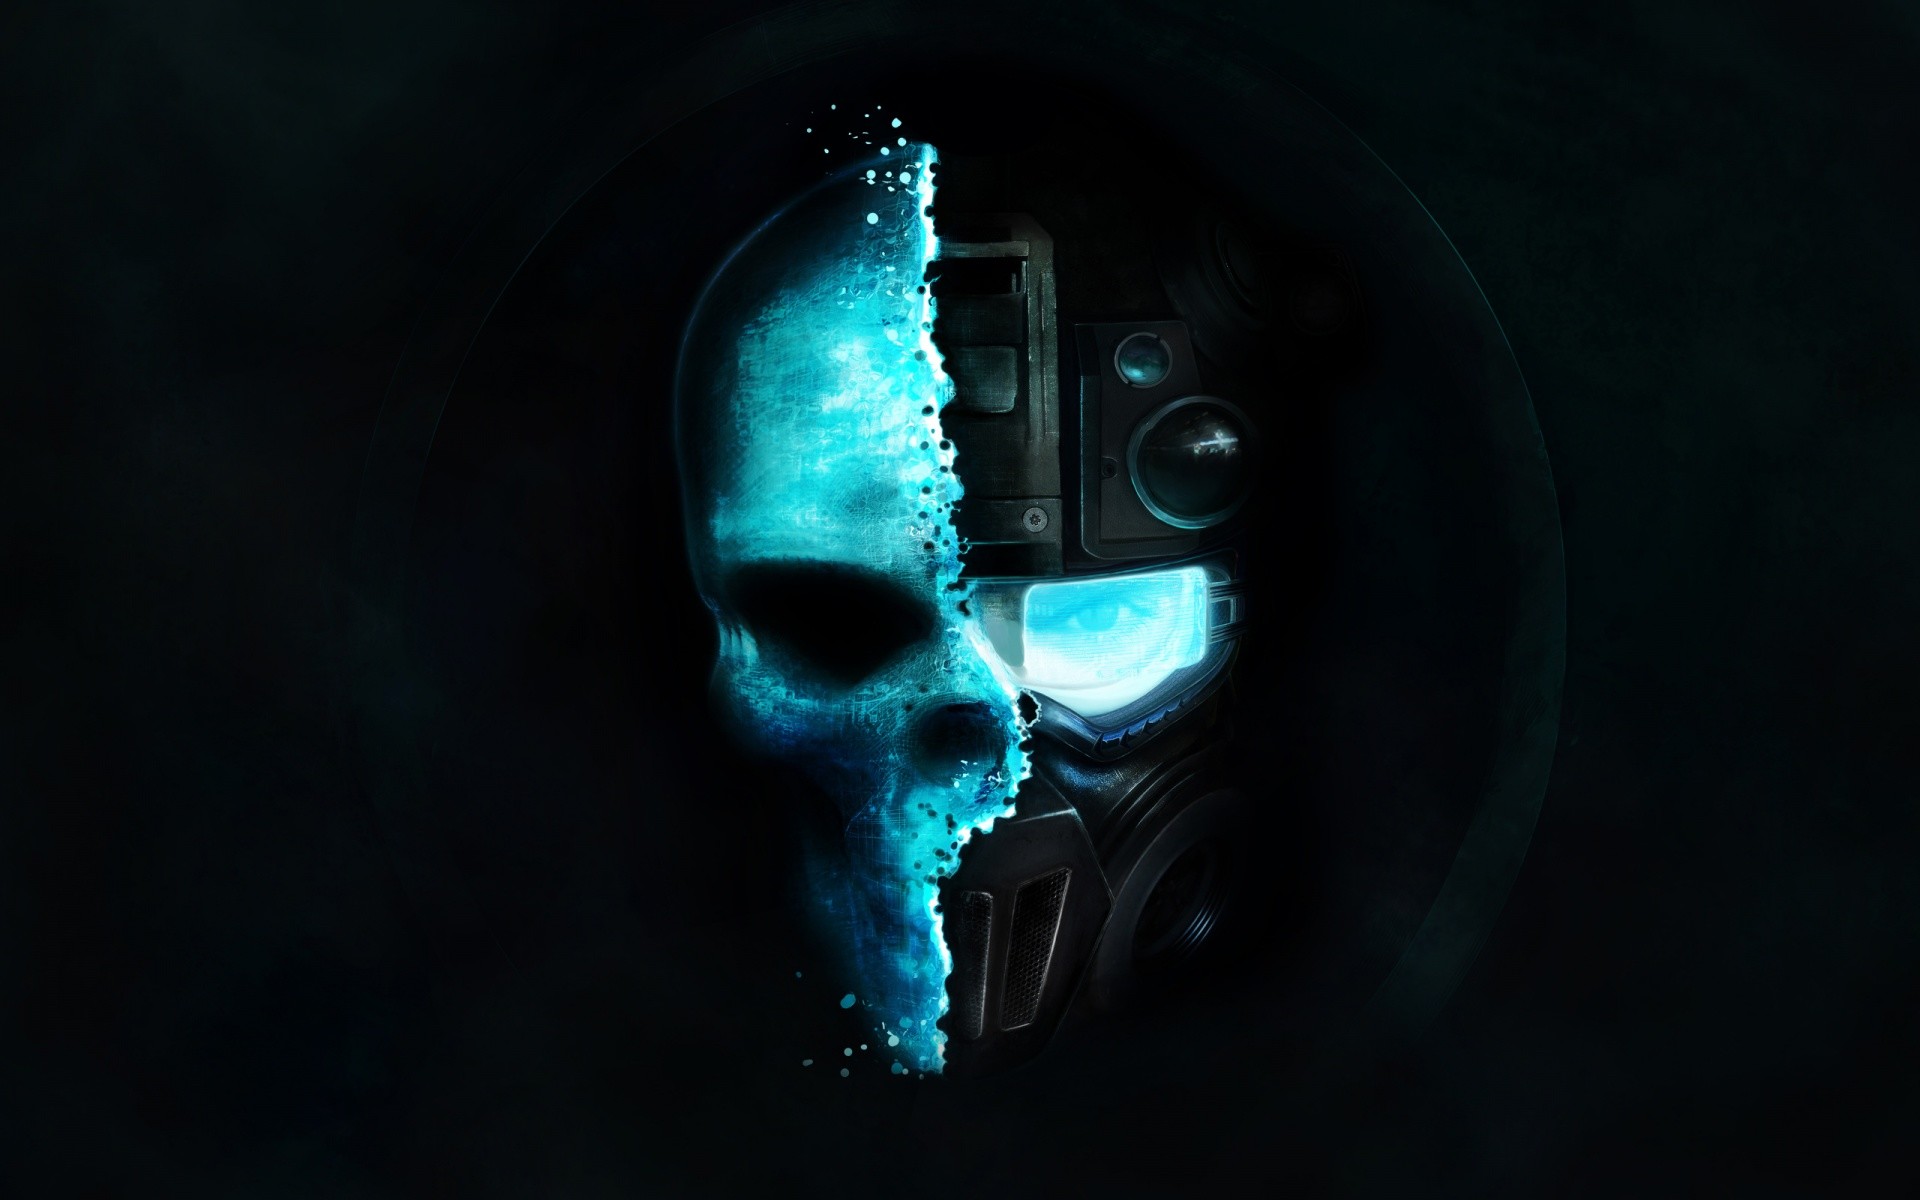 1920x1200 Abstract Skull Backgrounds Wallpapers - http://hdwallpapersf.com/abstract- skull-backgrounds-wallpapers | HDWallpapersf latest Post | Pinterest | Skull  ...